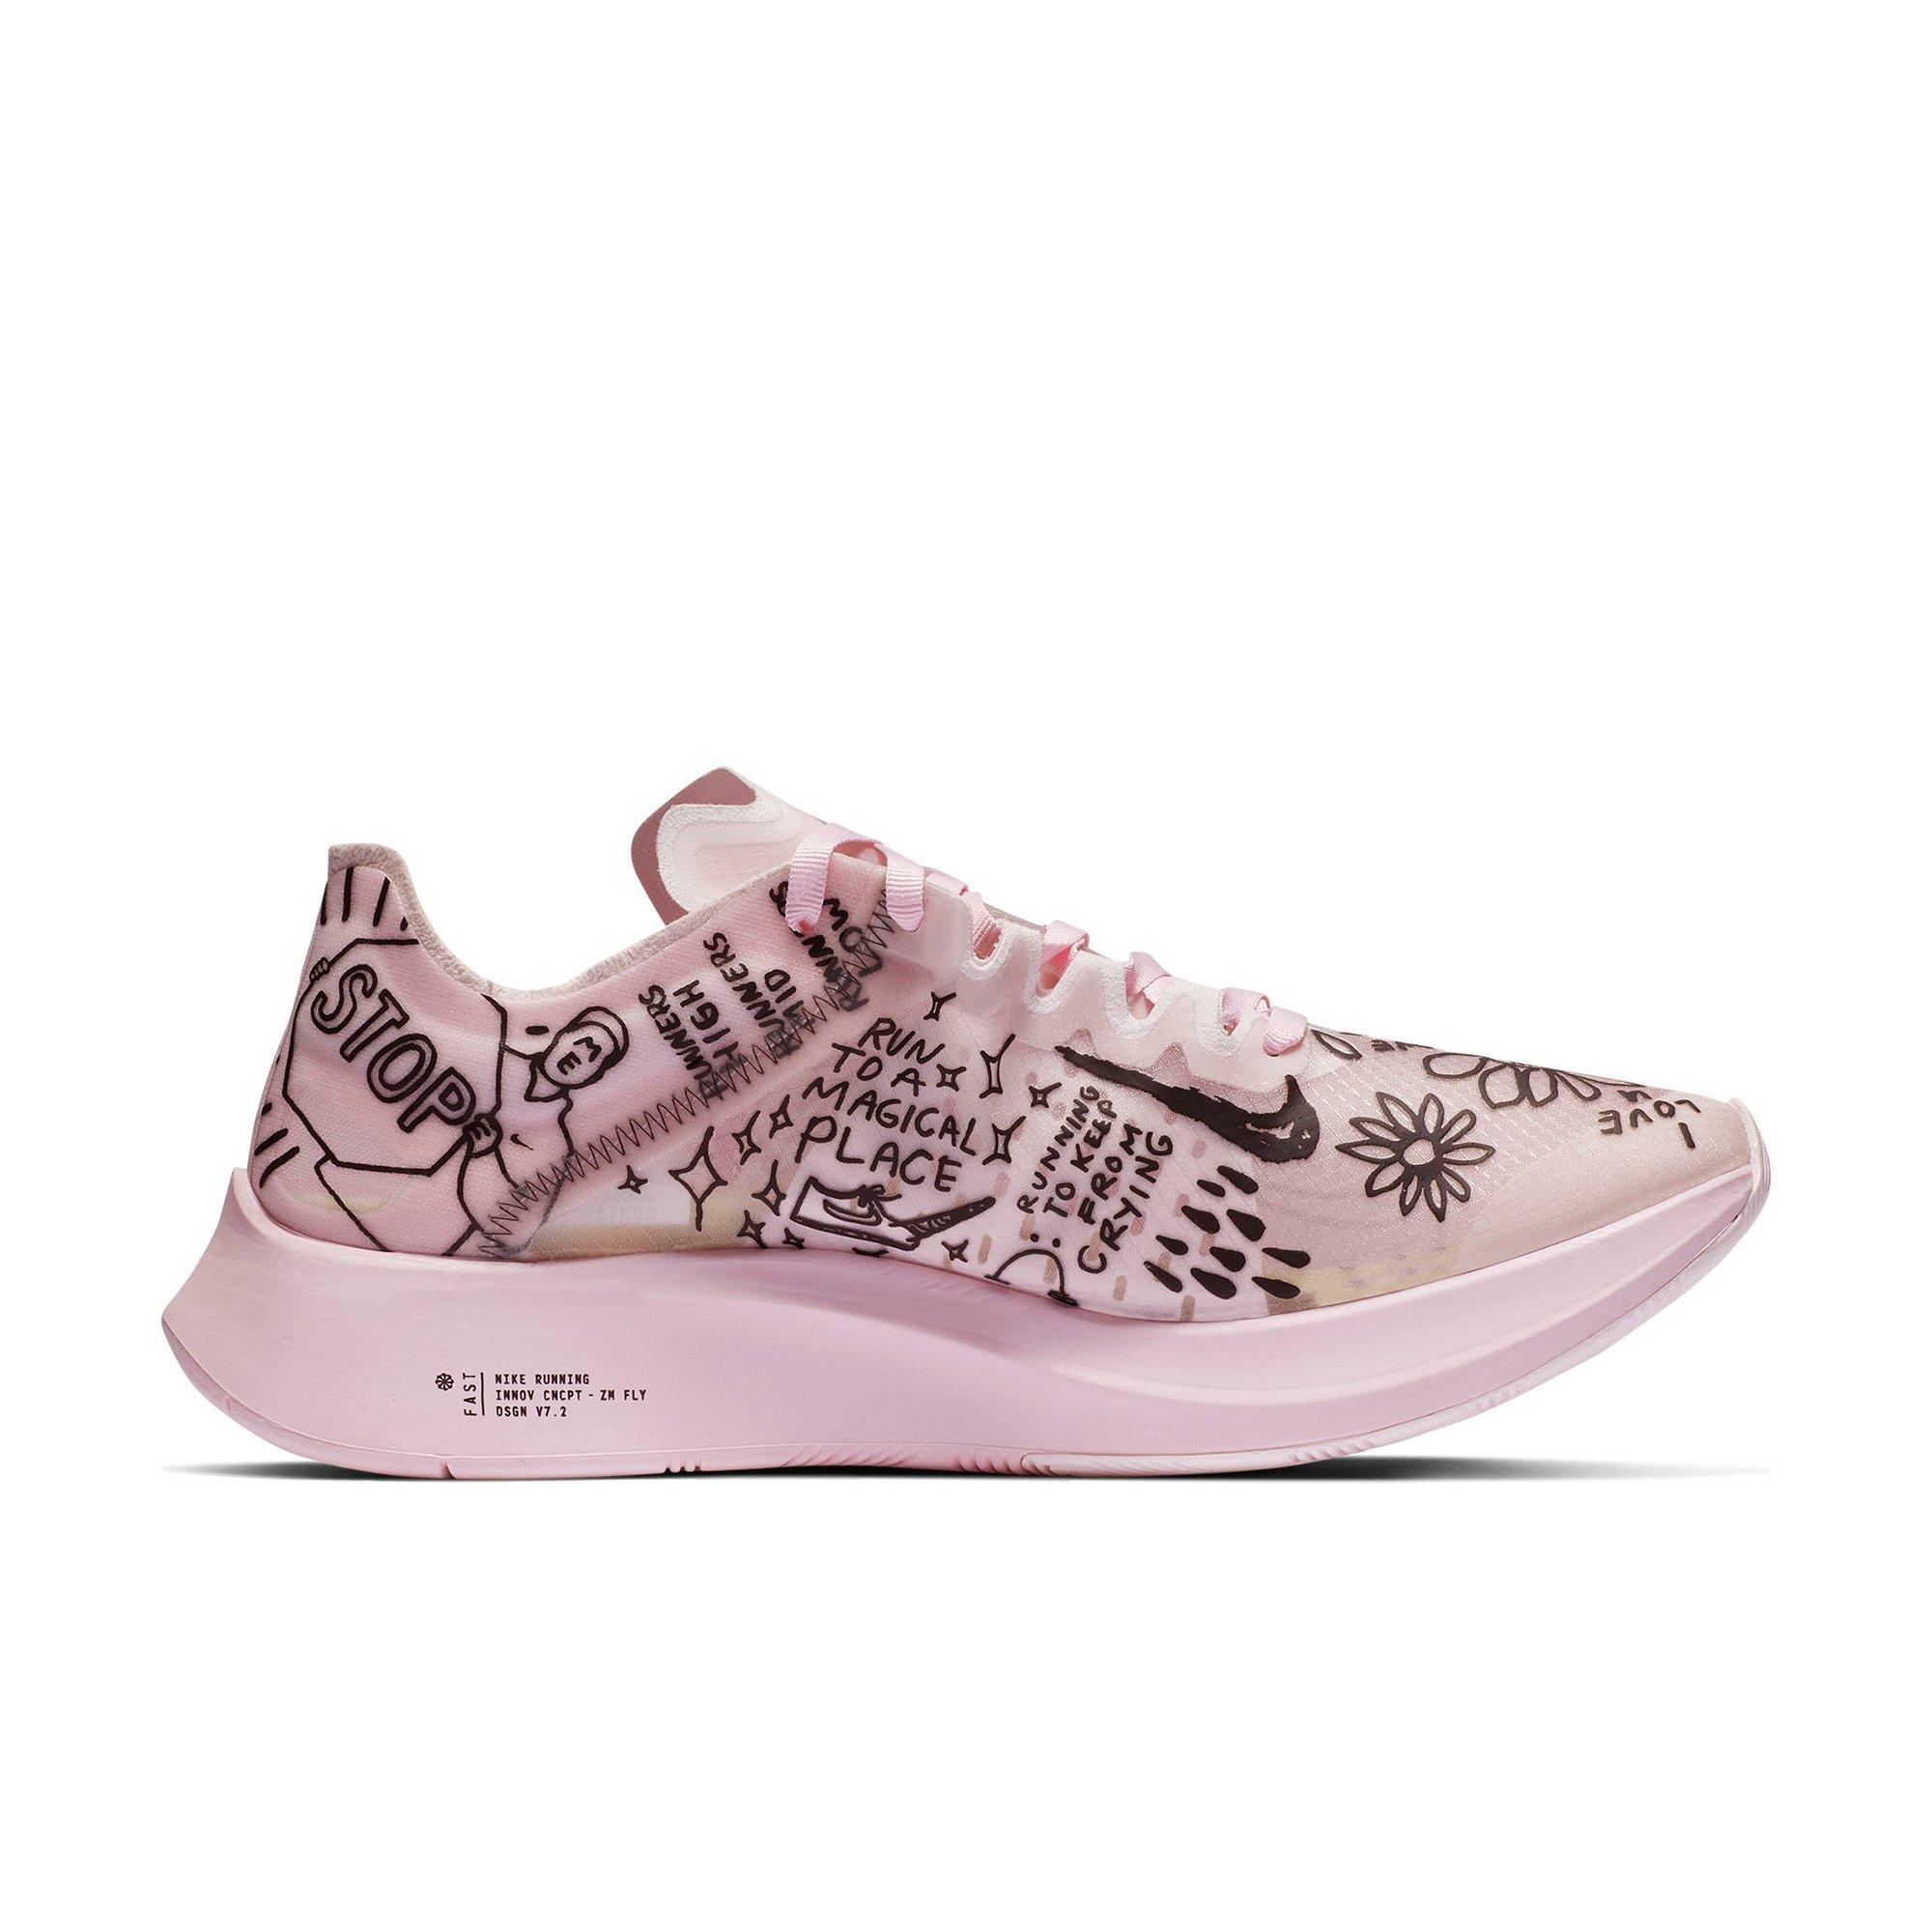 artist zoom fly sp fast